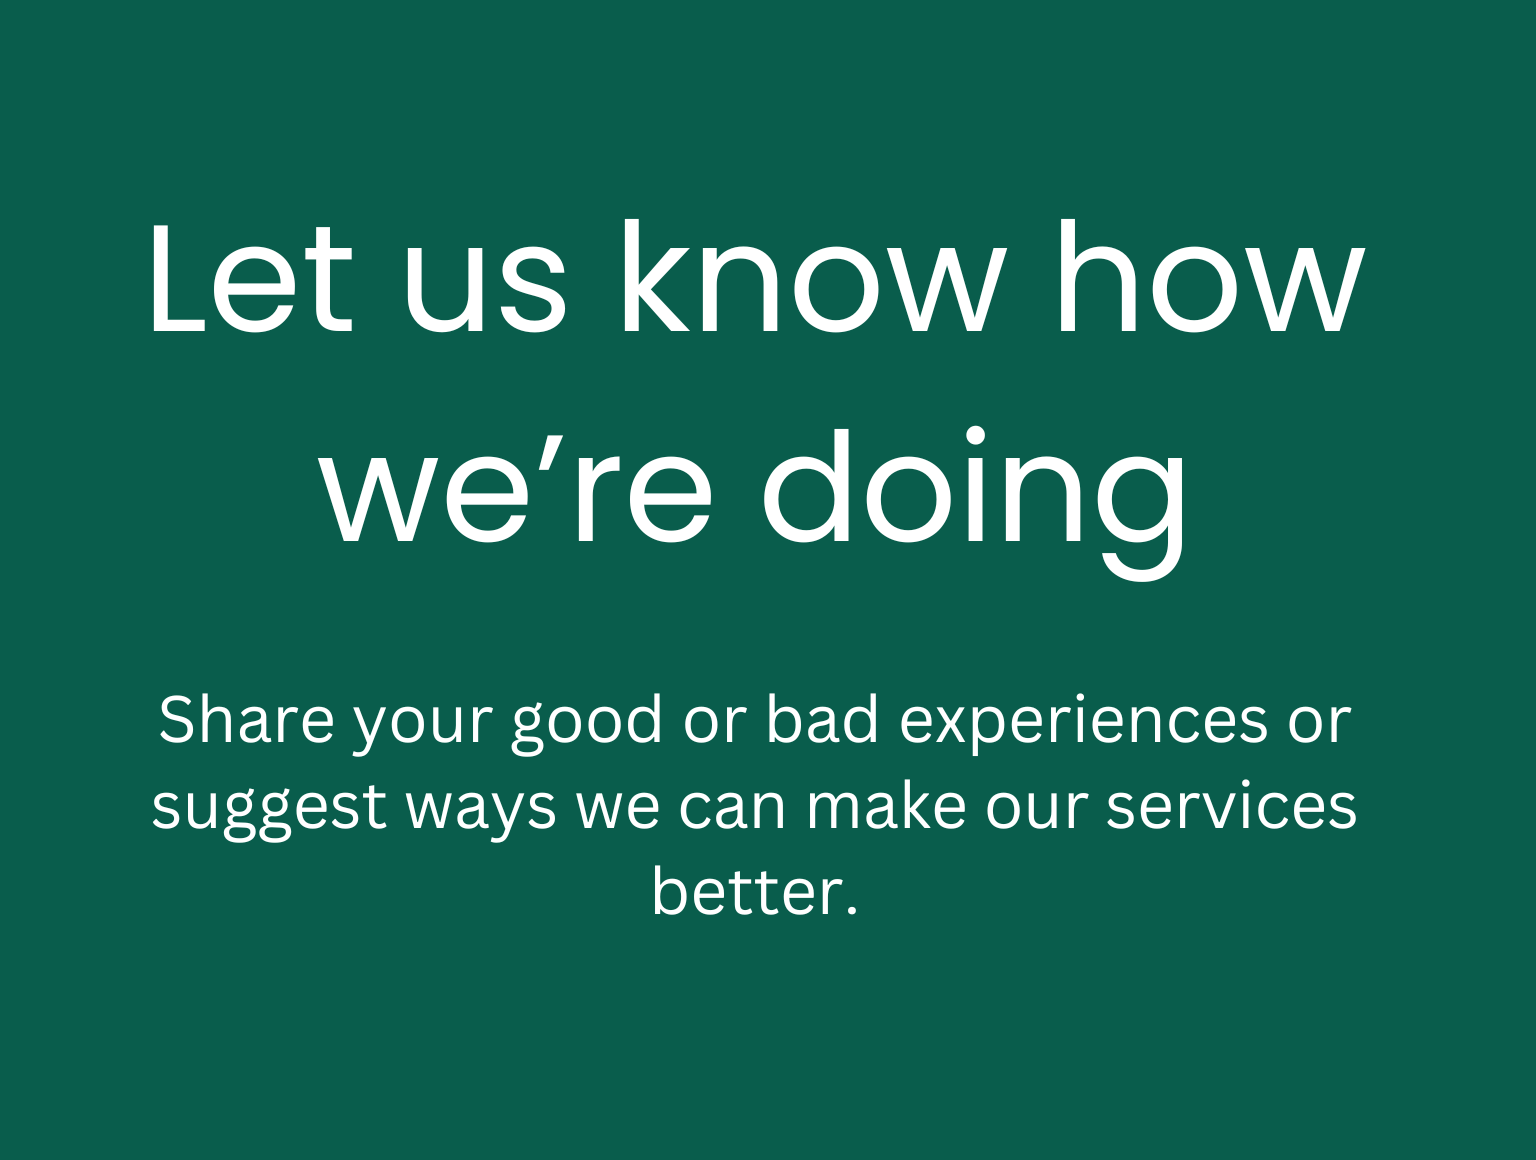 Green background and white text saying 'Let us know how we're doing. Share your good or bad experiences or suggest ways we can make our services better.'